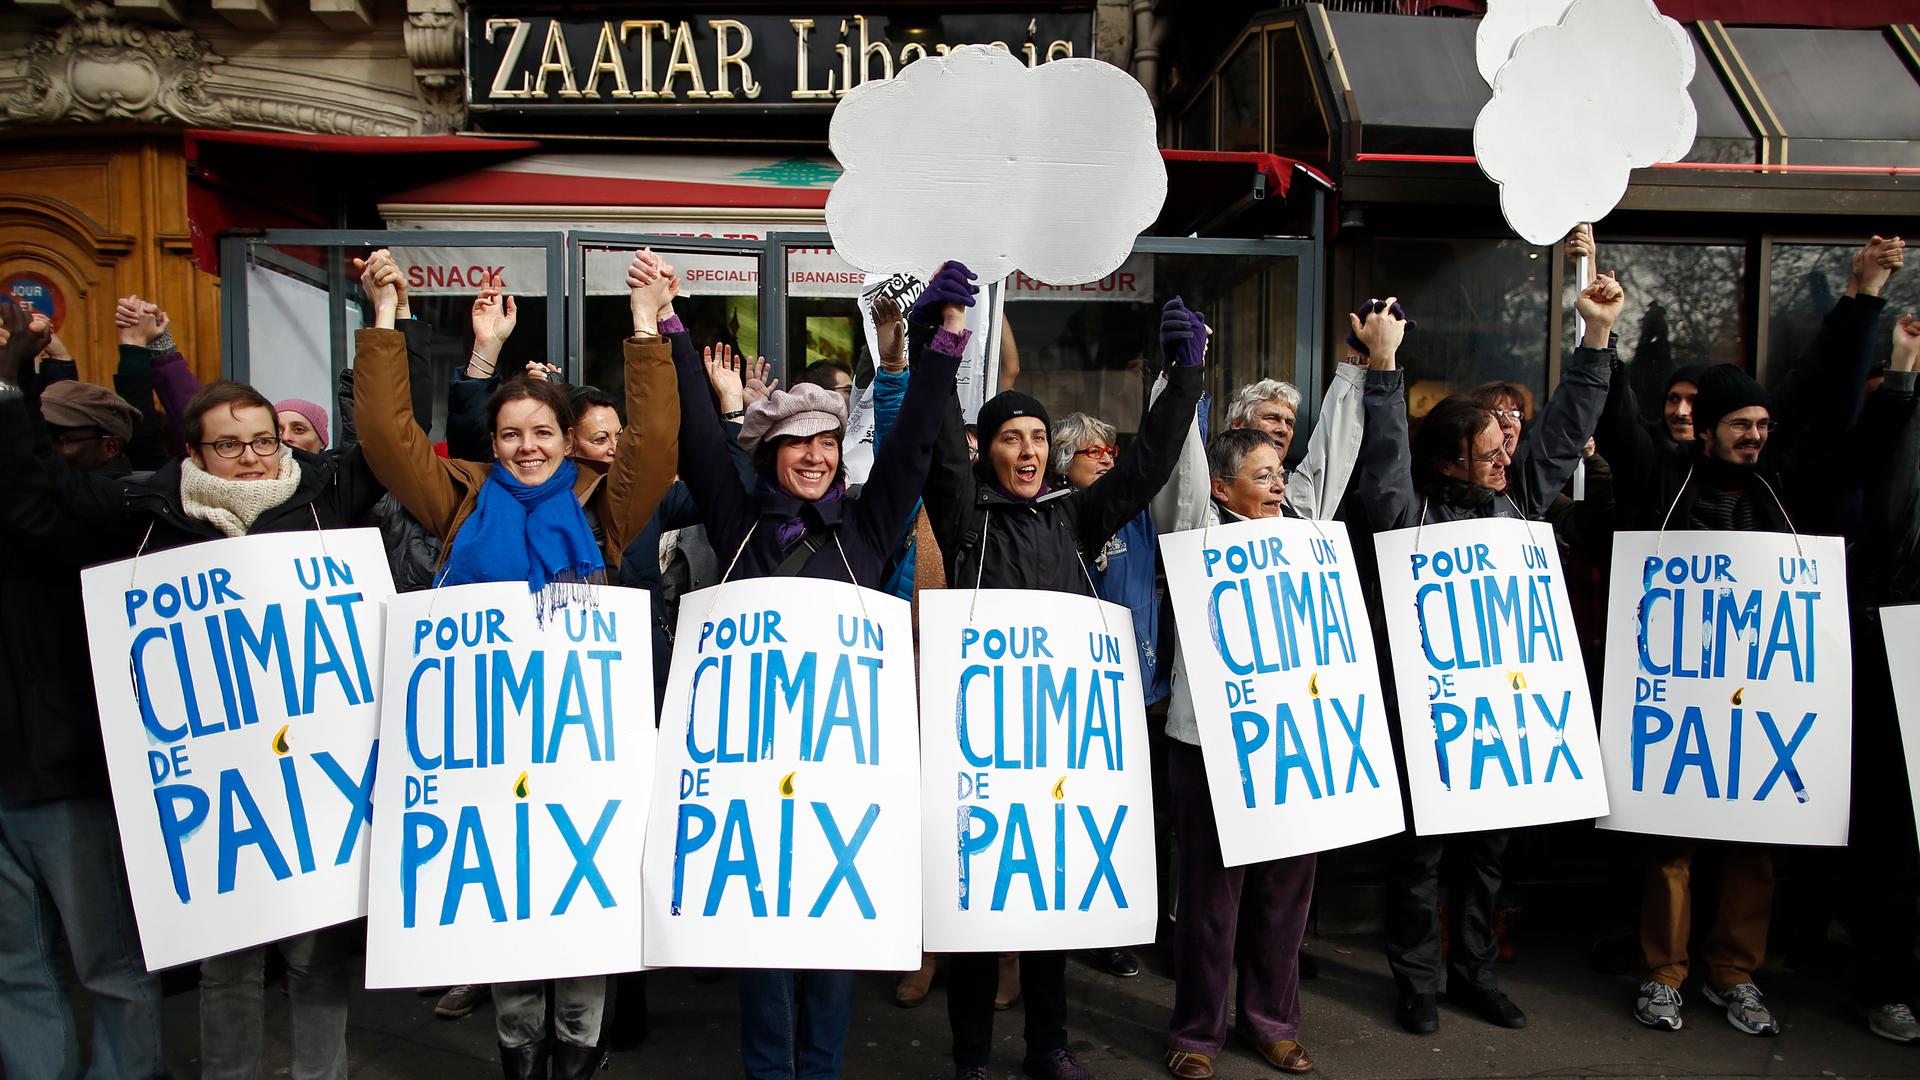 Climate activists formed a 2-mile human chain Sunday along Parisian sidewalks after authorities banned a full-fledged climate march following the Nov. 13 attacks in the French capital. Demonstrators said they were determined to find ways to express their 